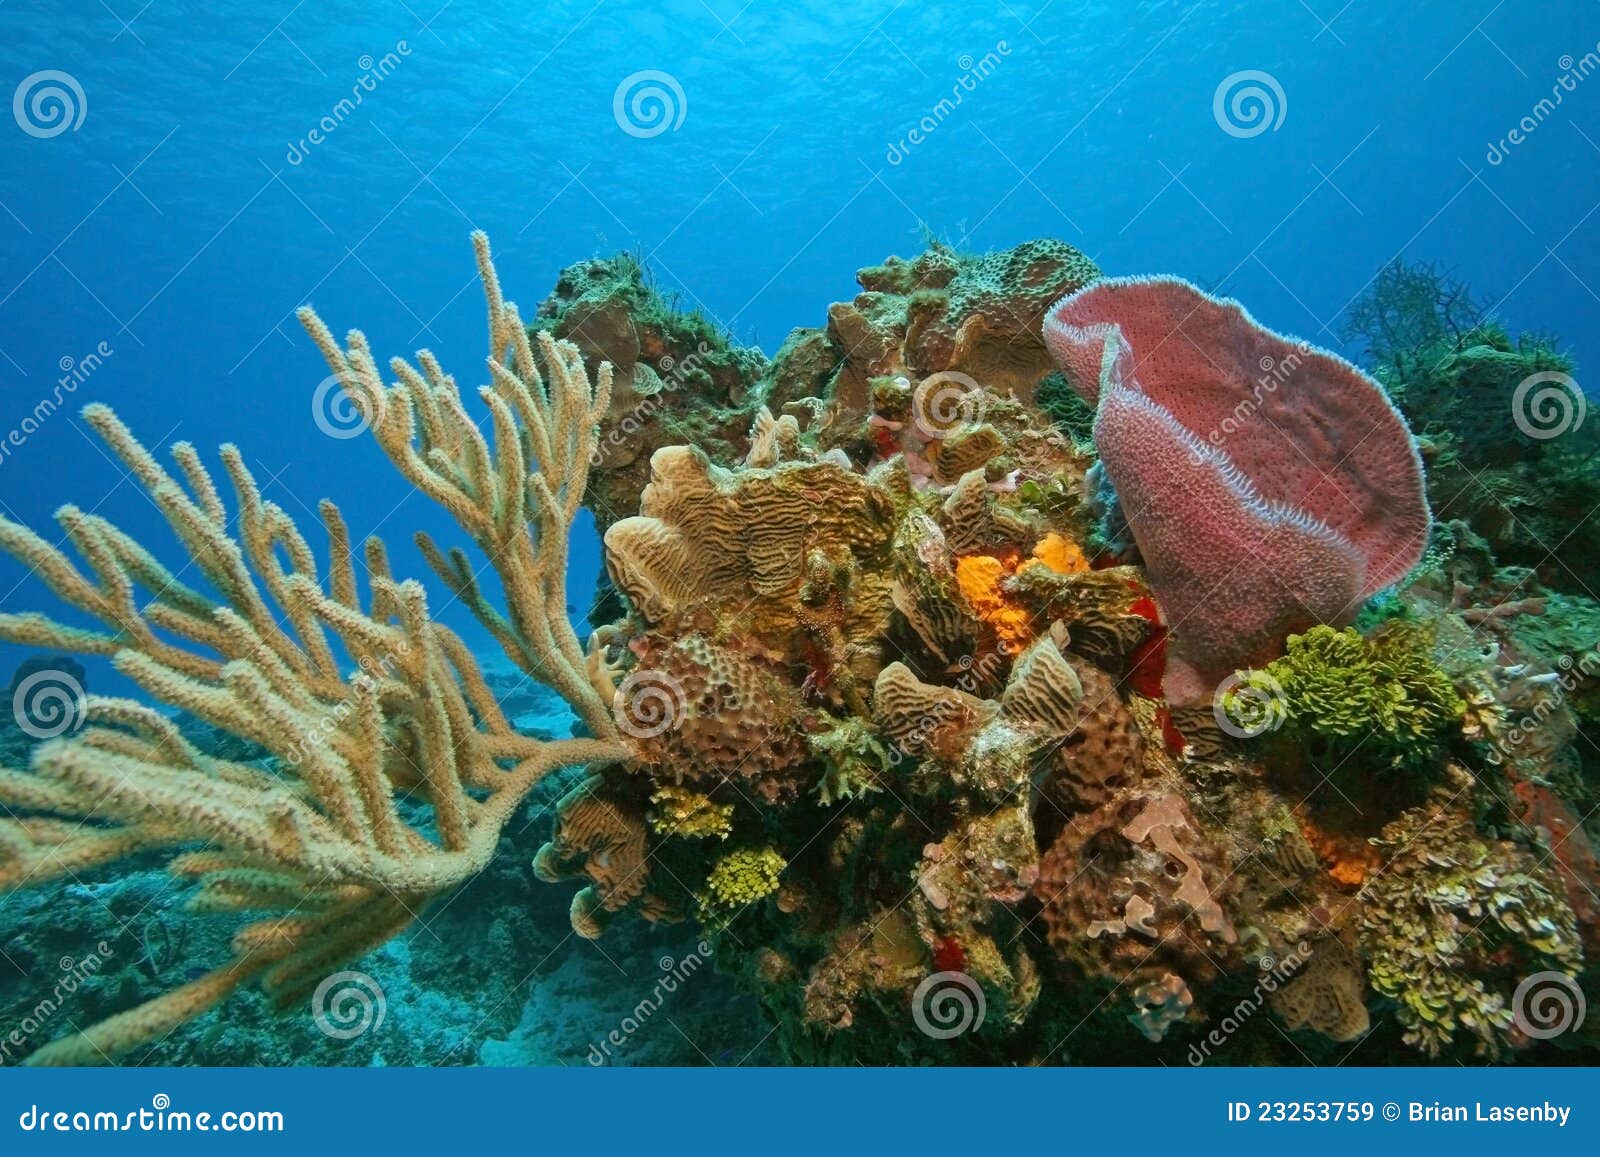 coral reef - cozumel